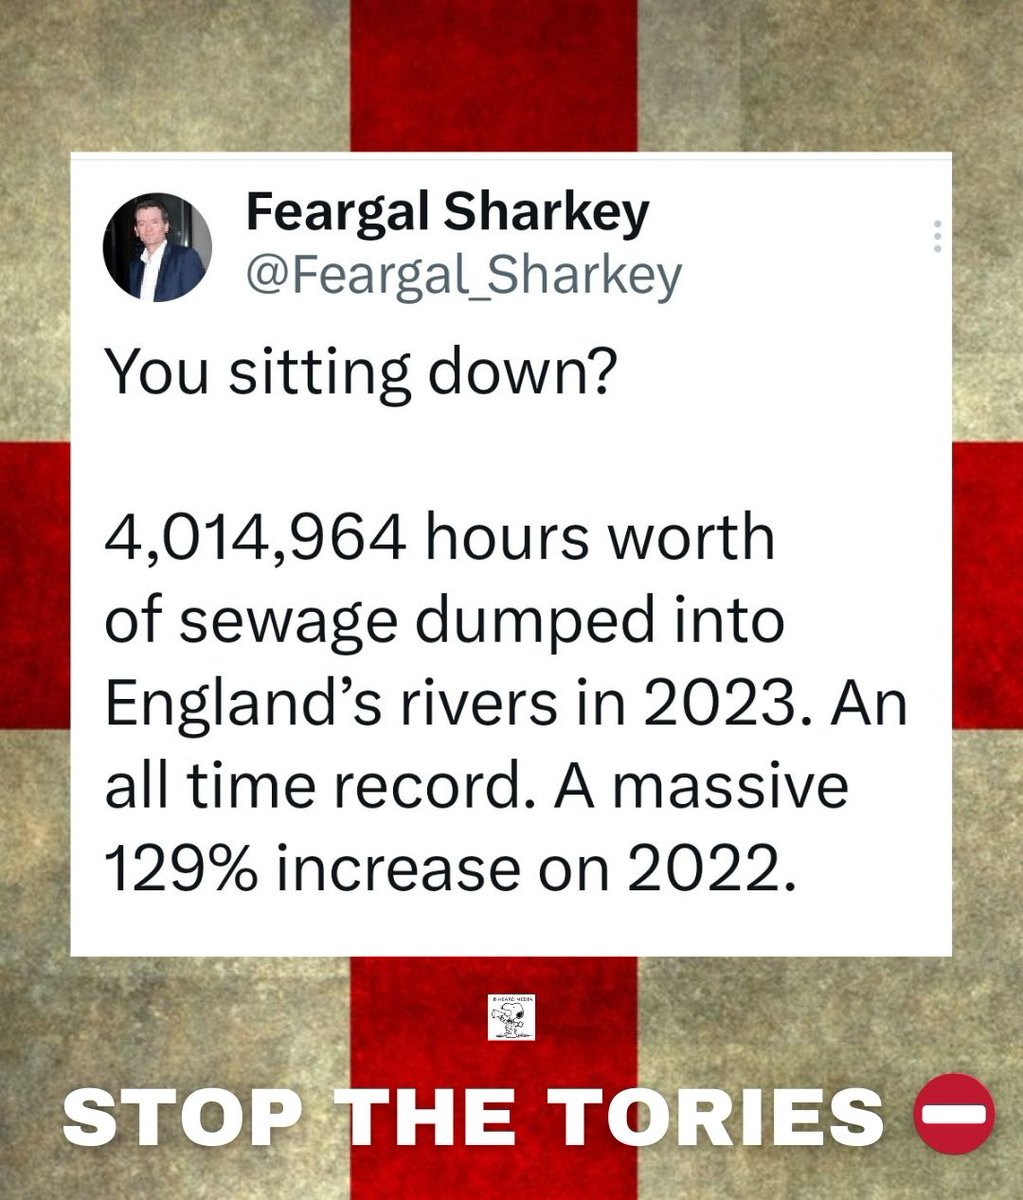 More than 4m hours of raw sewage discharges poured into rivers and seas in England last year, a 129% increase on the previous 12 months!

#RishiSunak
#SewageScandal
#TorySewageParty
#ToryCriminals
#StopTheTories
#cutthecrap
#endsewagepollution
#ToriesOut629
#RenationaliseWater ⬅️